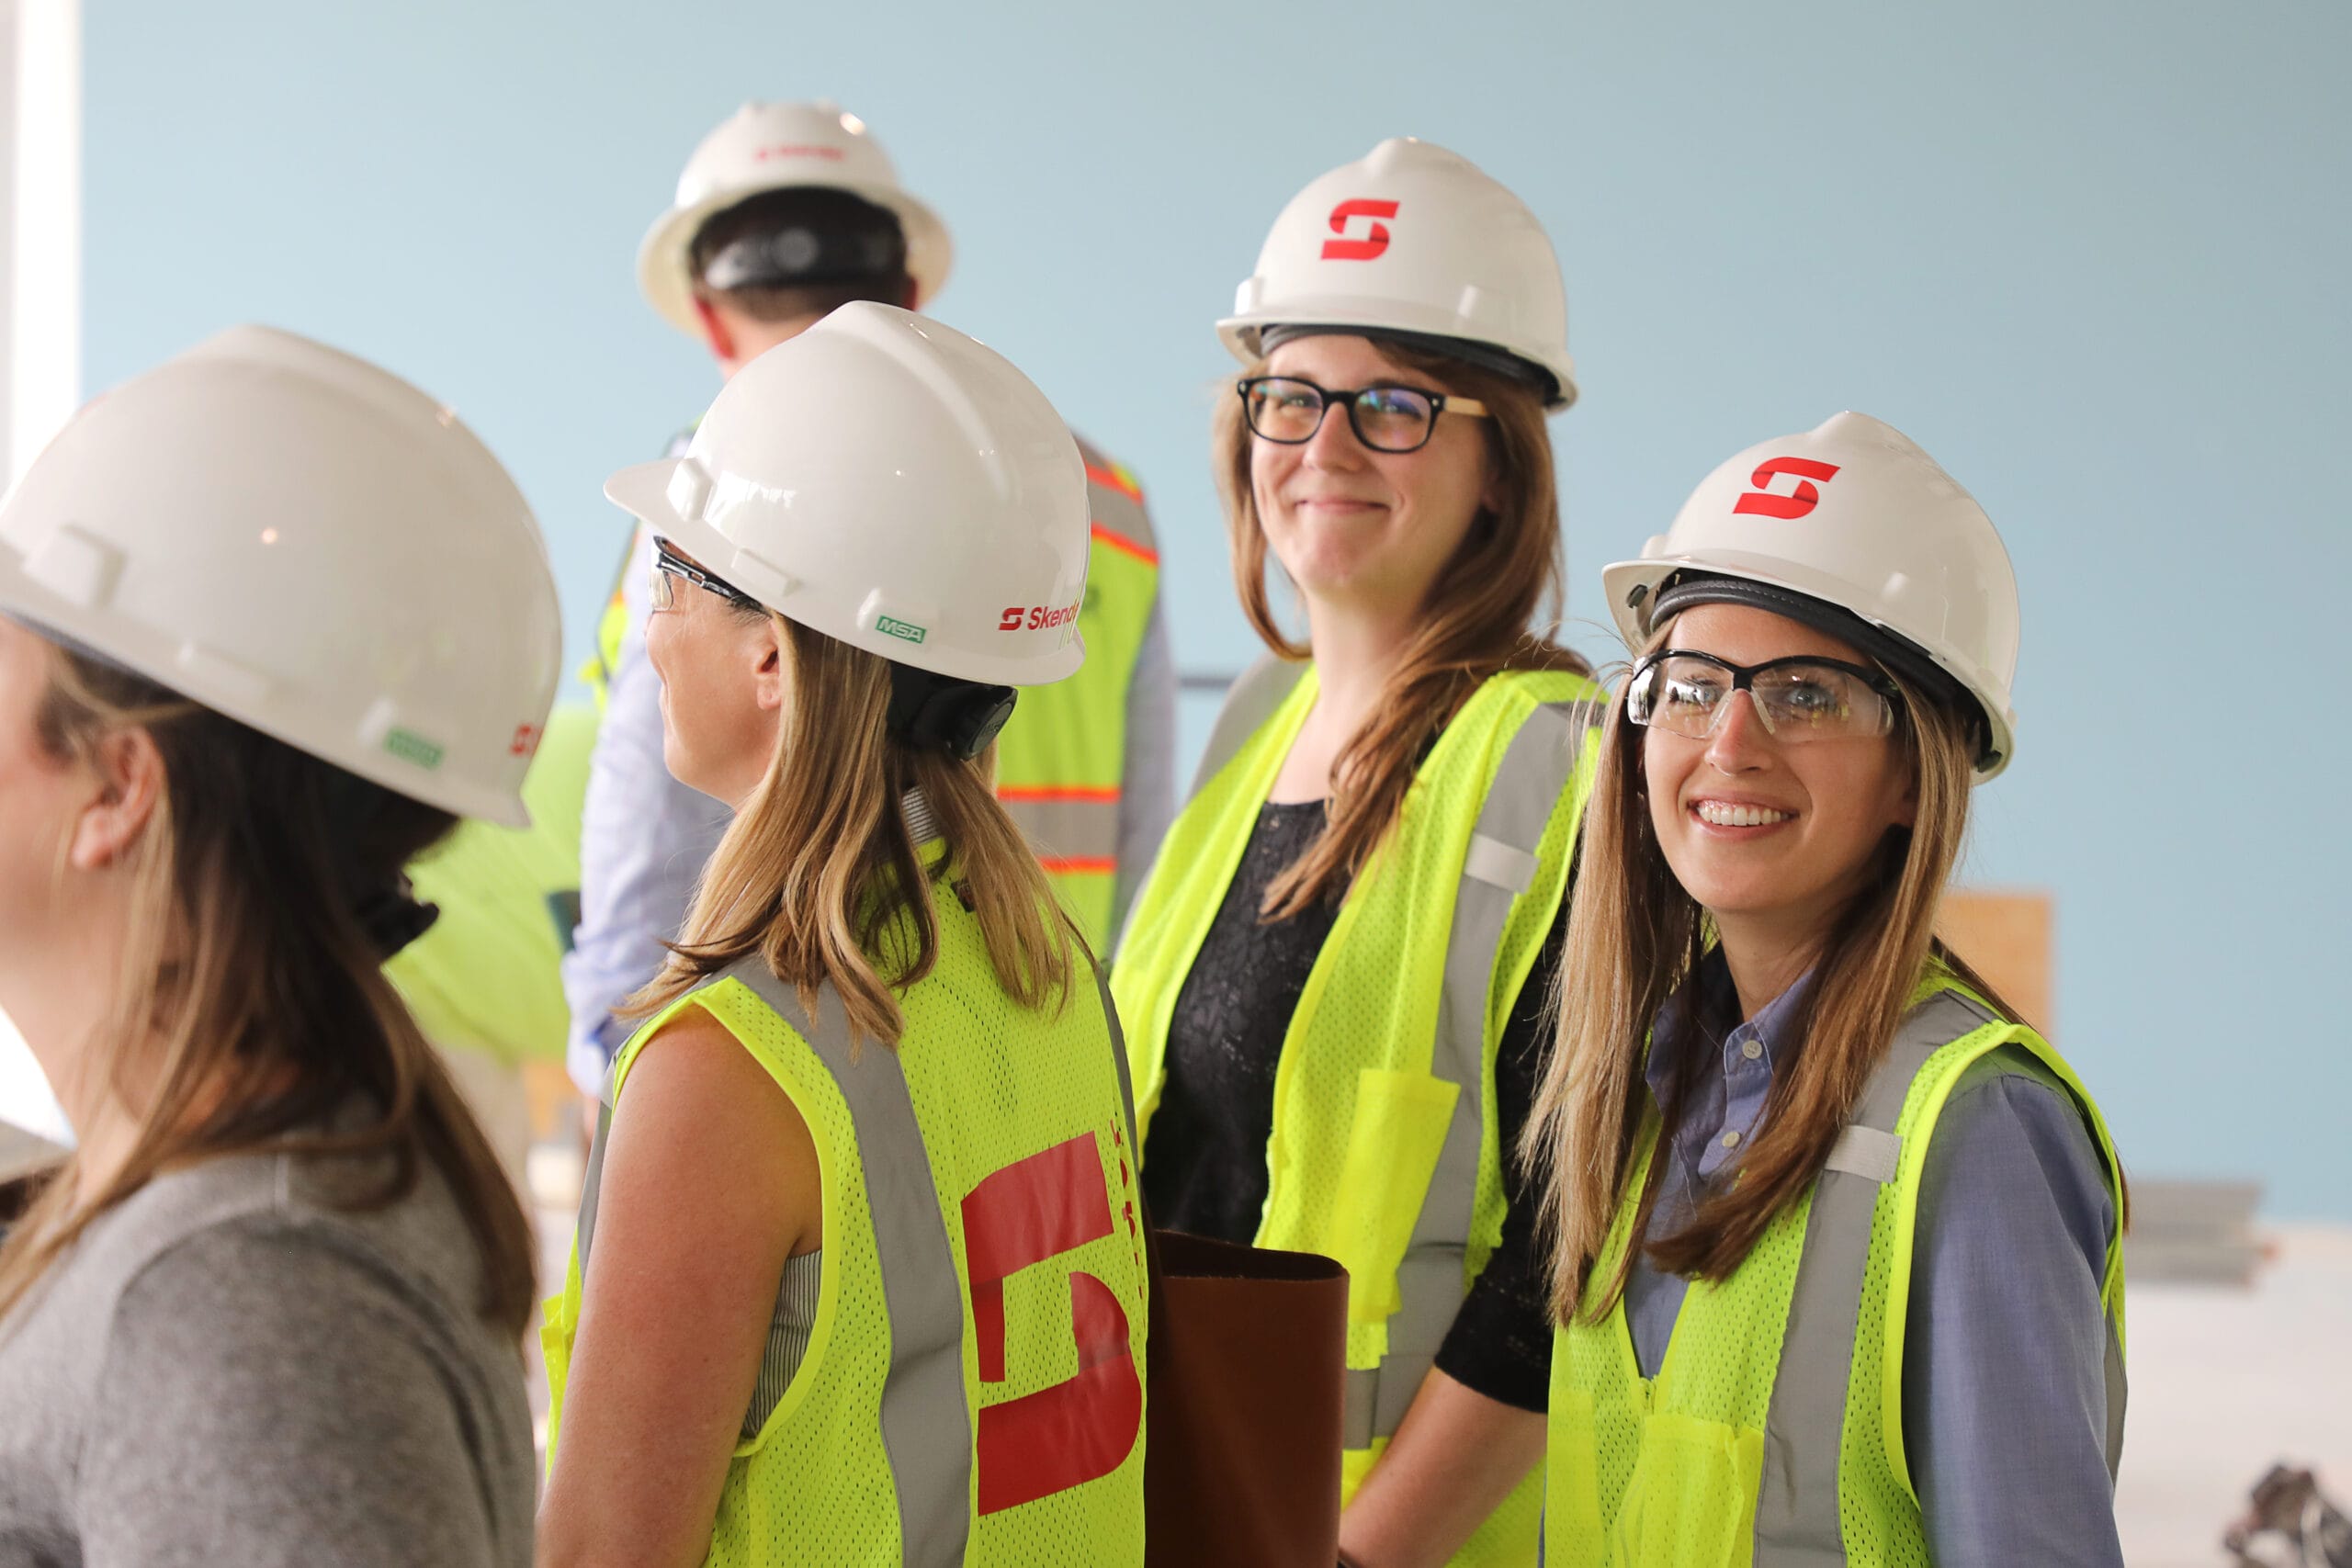 Women Have Created Paths For Upward Growth In Construction. Now They’re Working On The Next Step